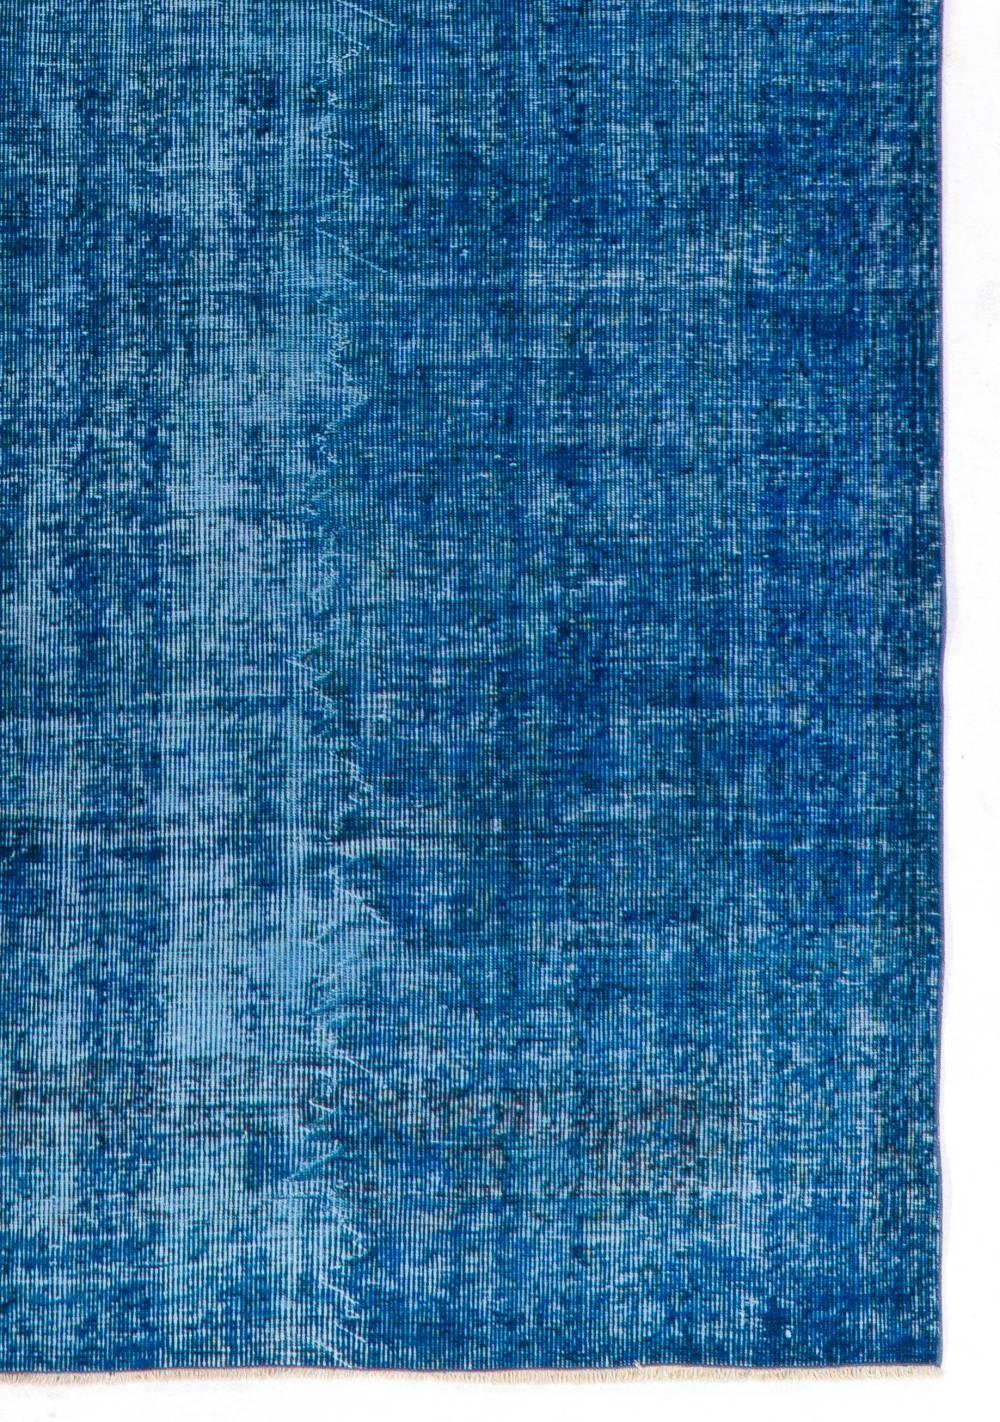 Mid-20th Century 7x10 Ft Decorative Vintage Turkish Rug ReDyed in Blue Color for Modern Interiors